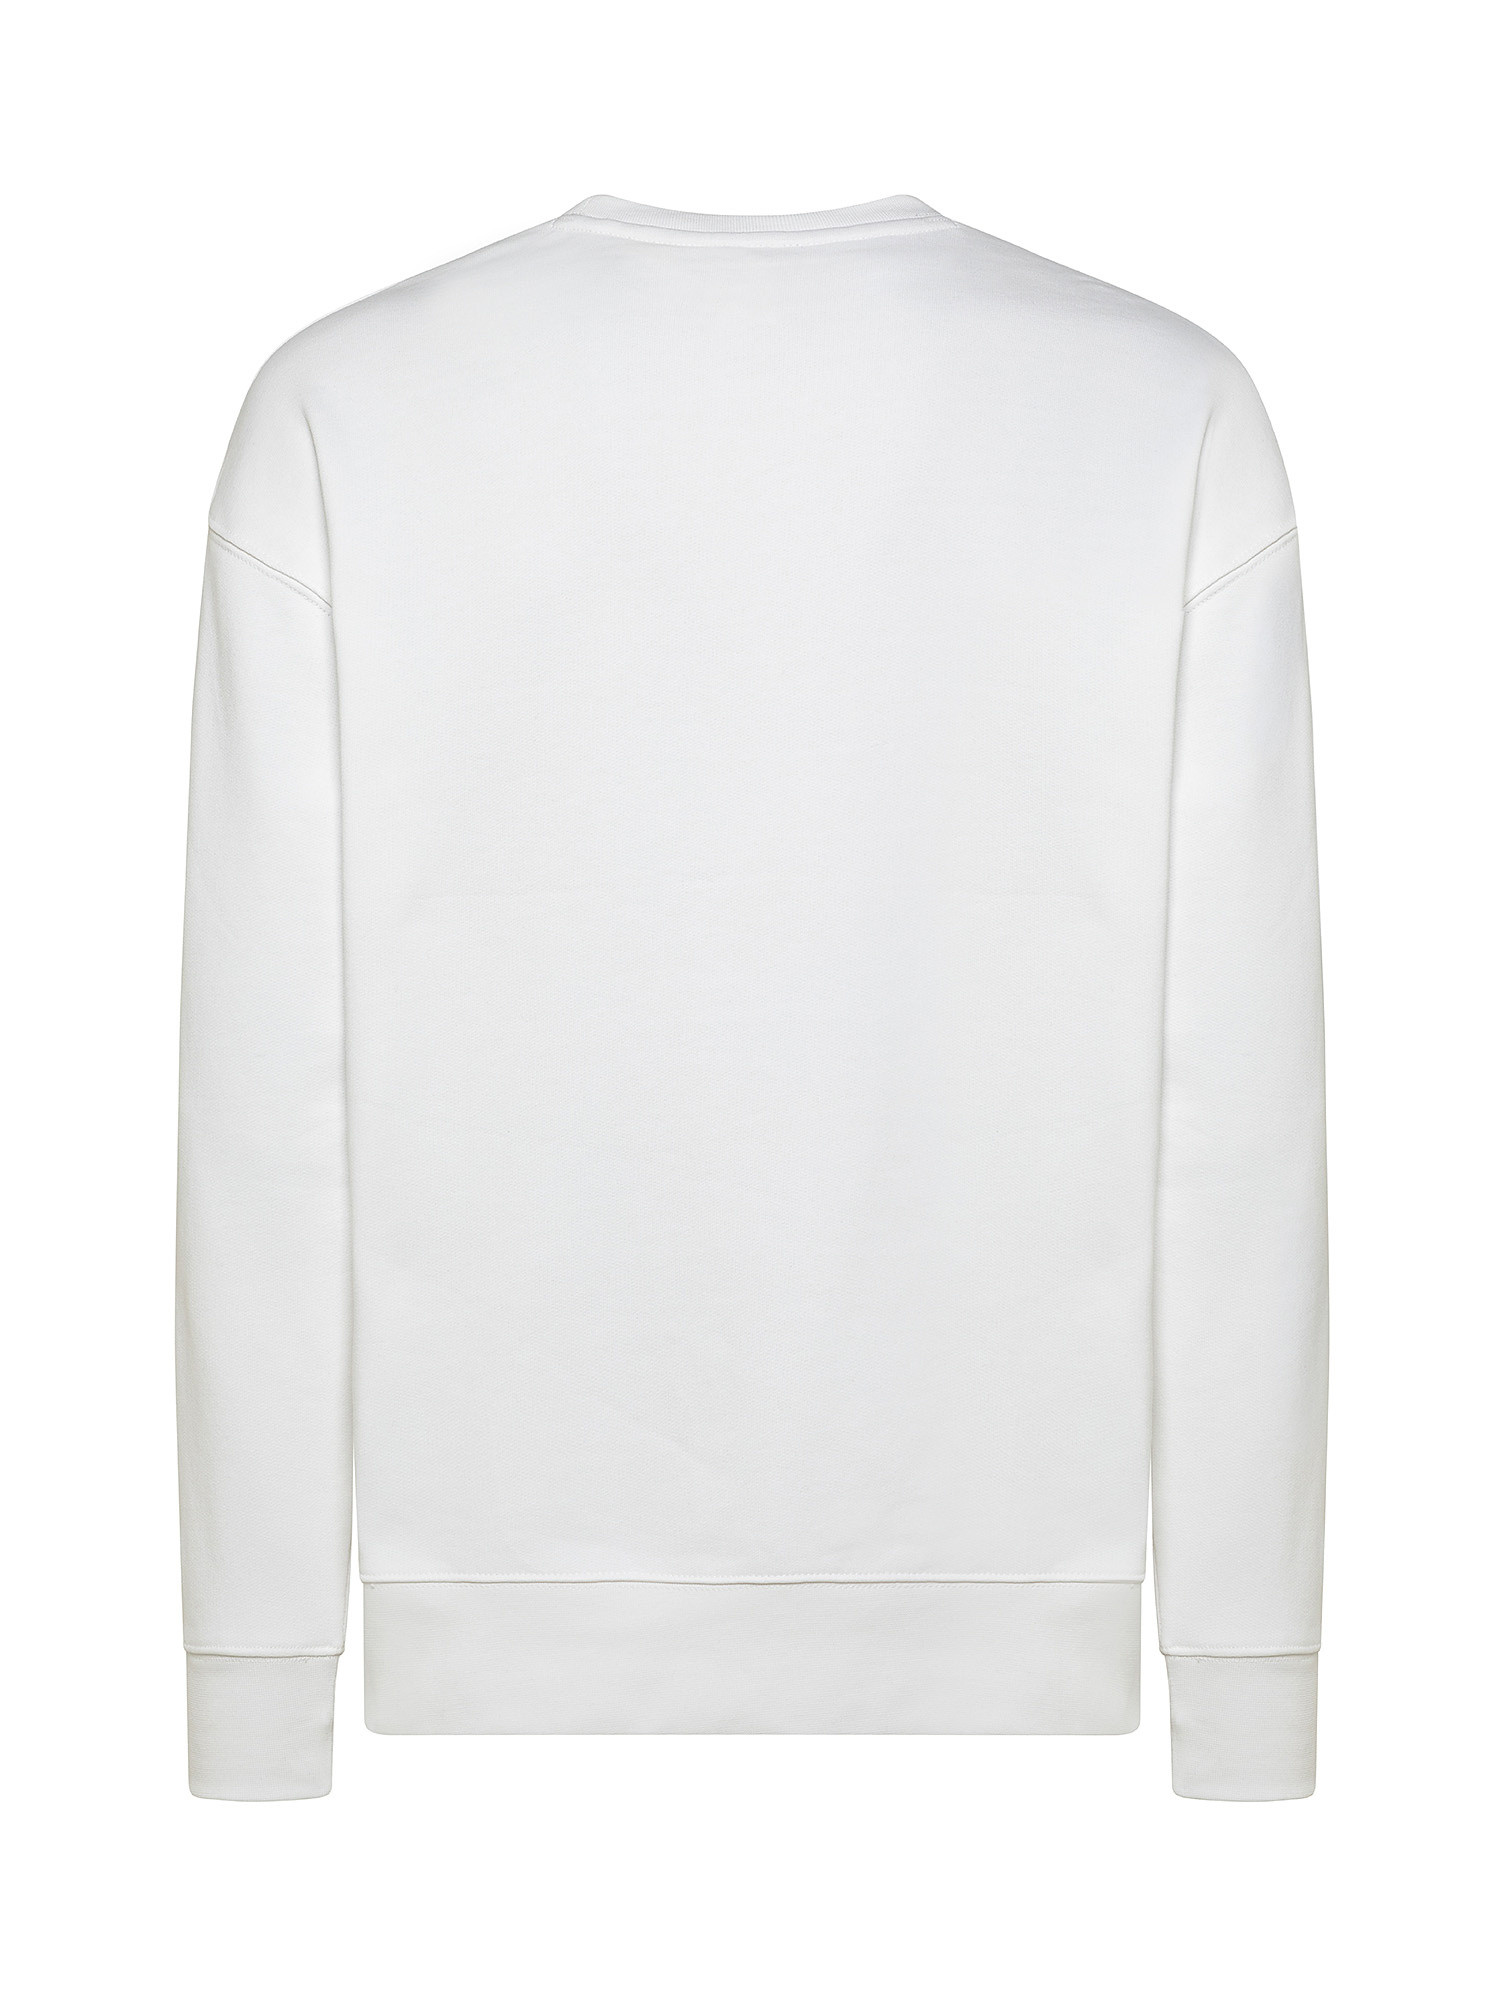 Sweatshirt with embroidery, White, large image number 1